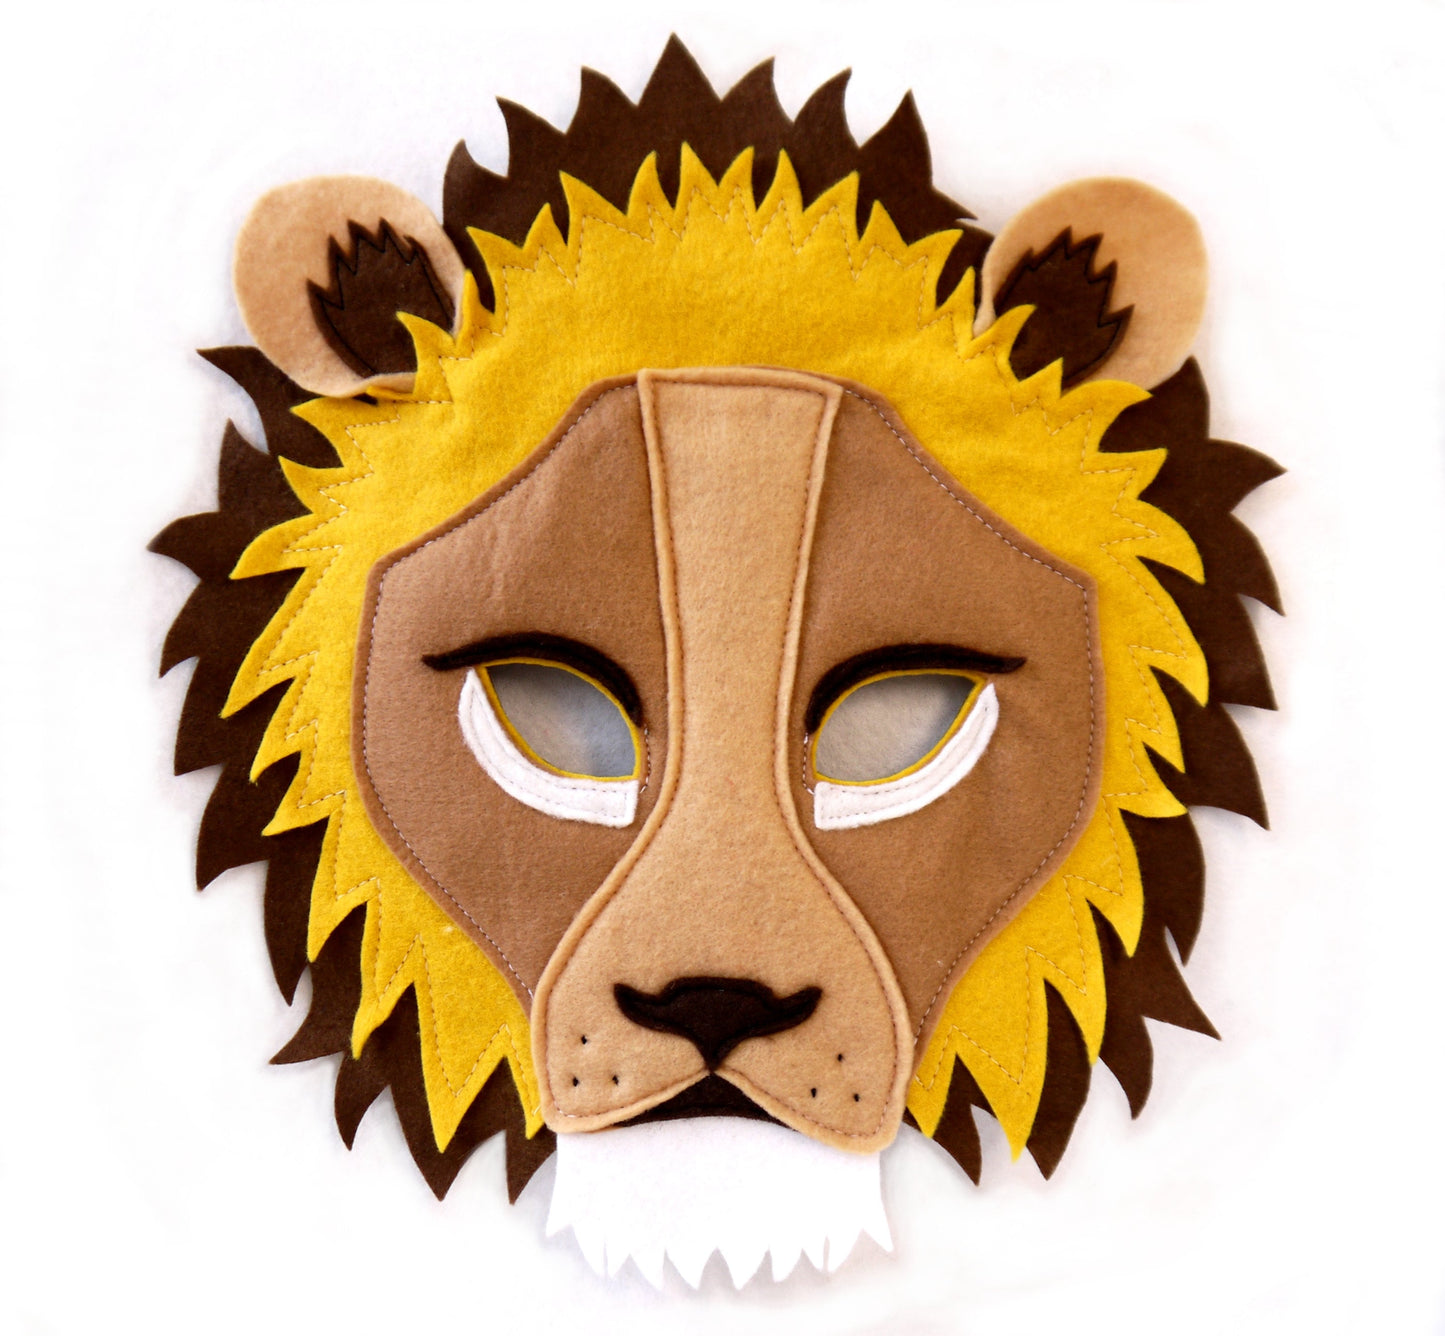 Lion costume mask, book Day costume, Mask, costume, kids and adult size, gift, party theatre, play, headdress